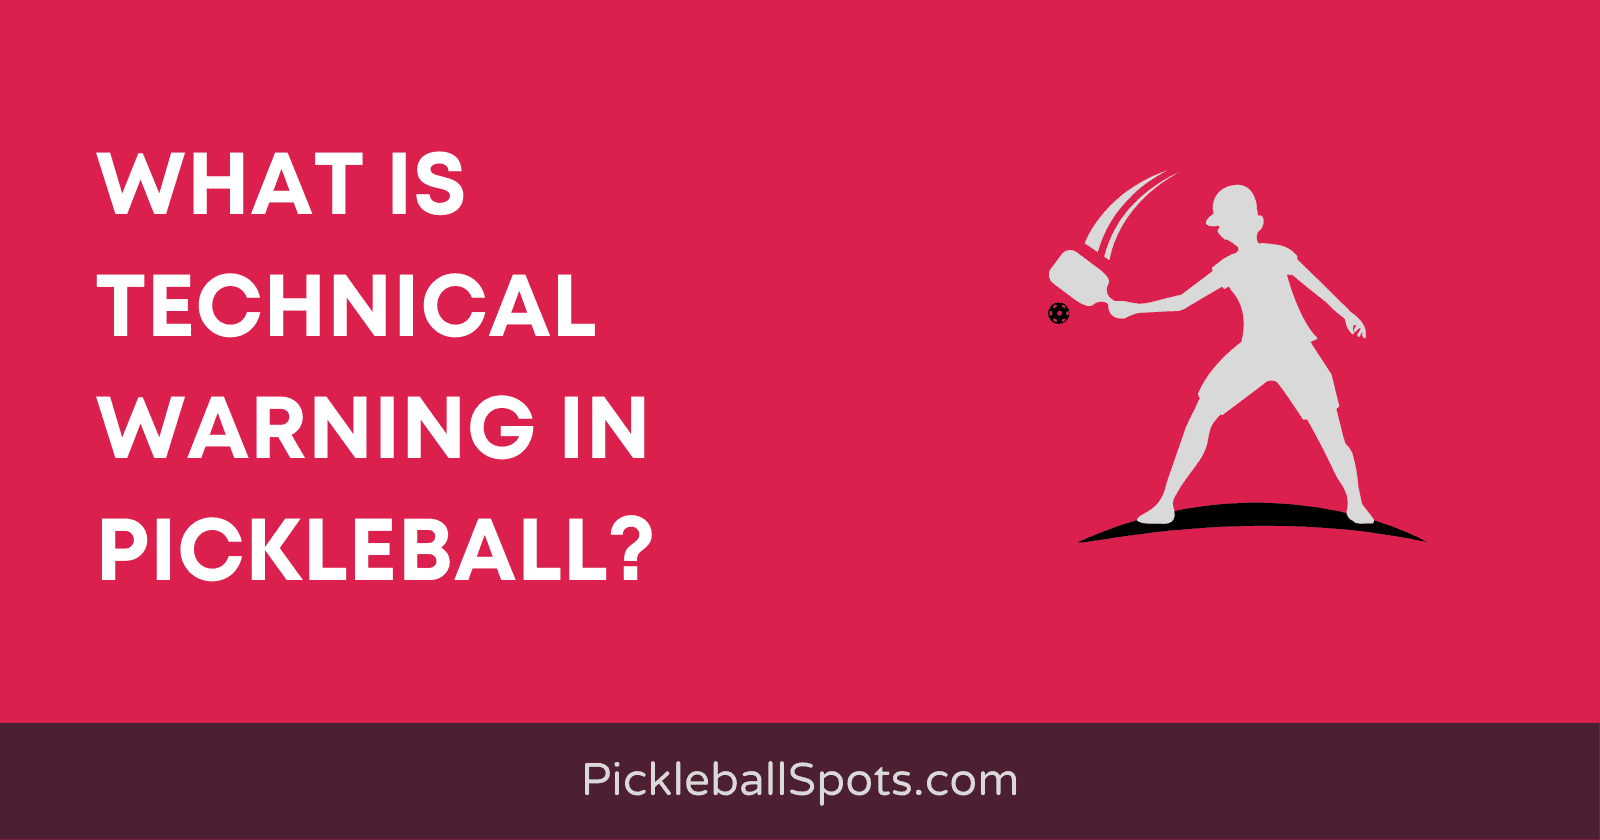 What Is Technical Warning In Pickleball